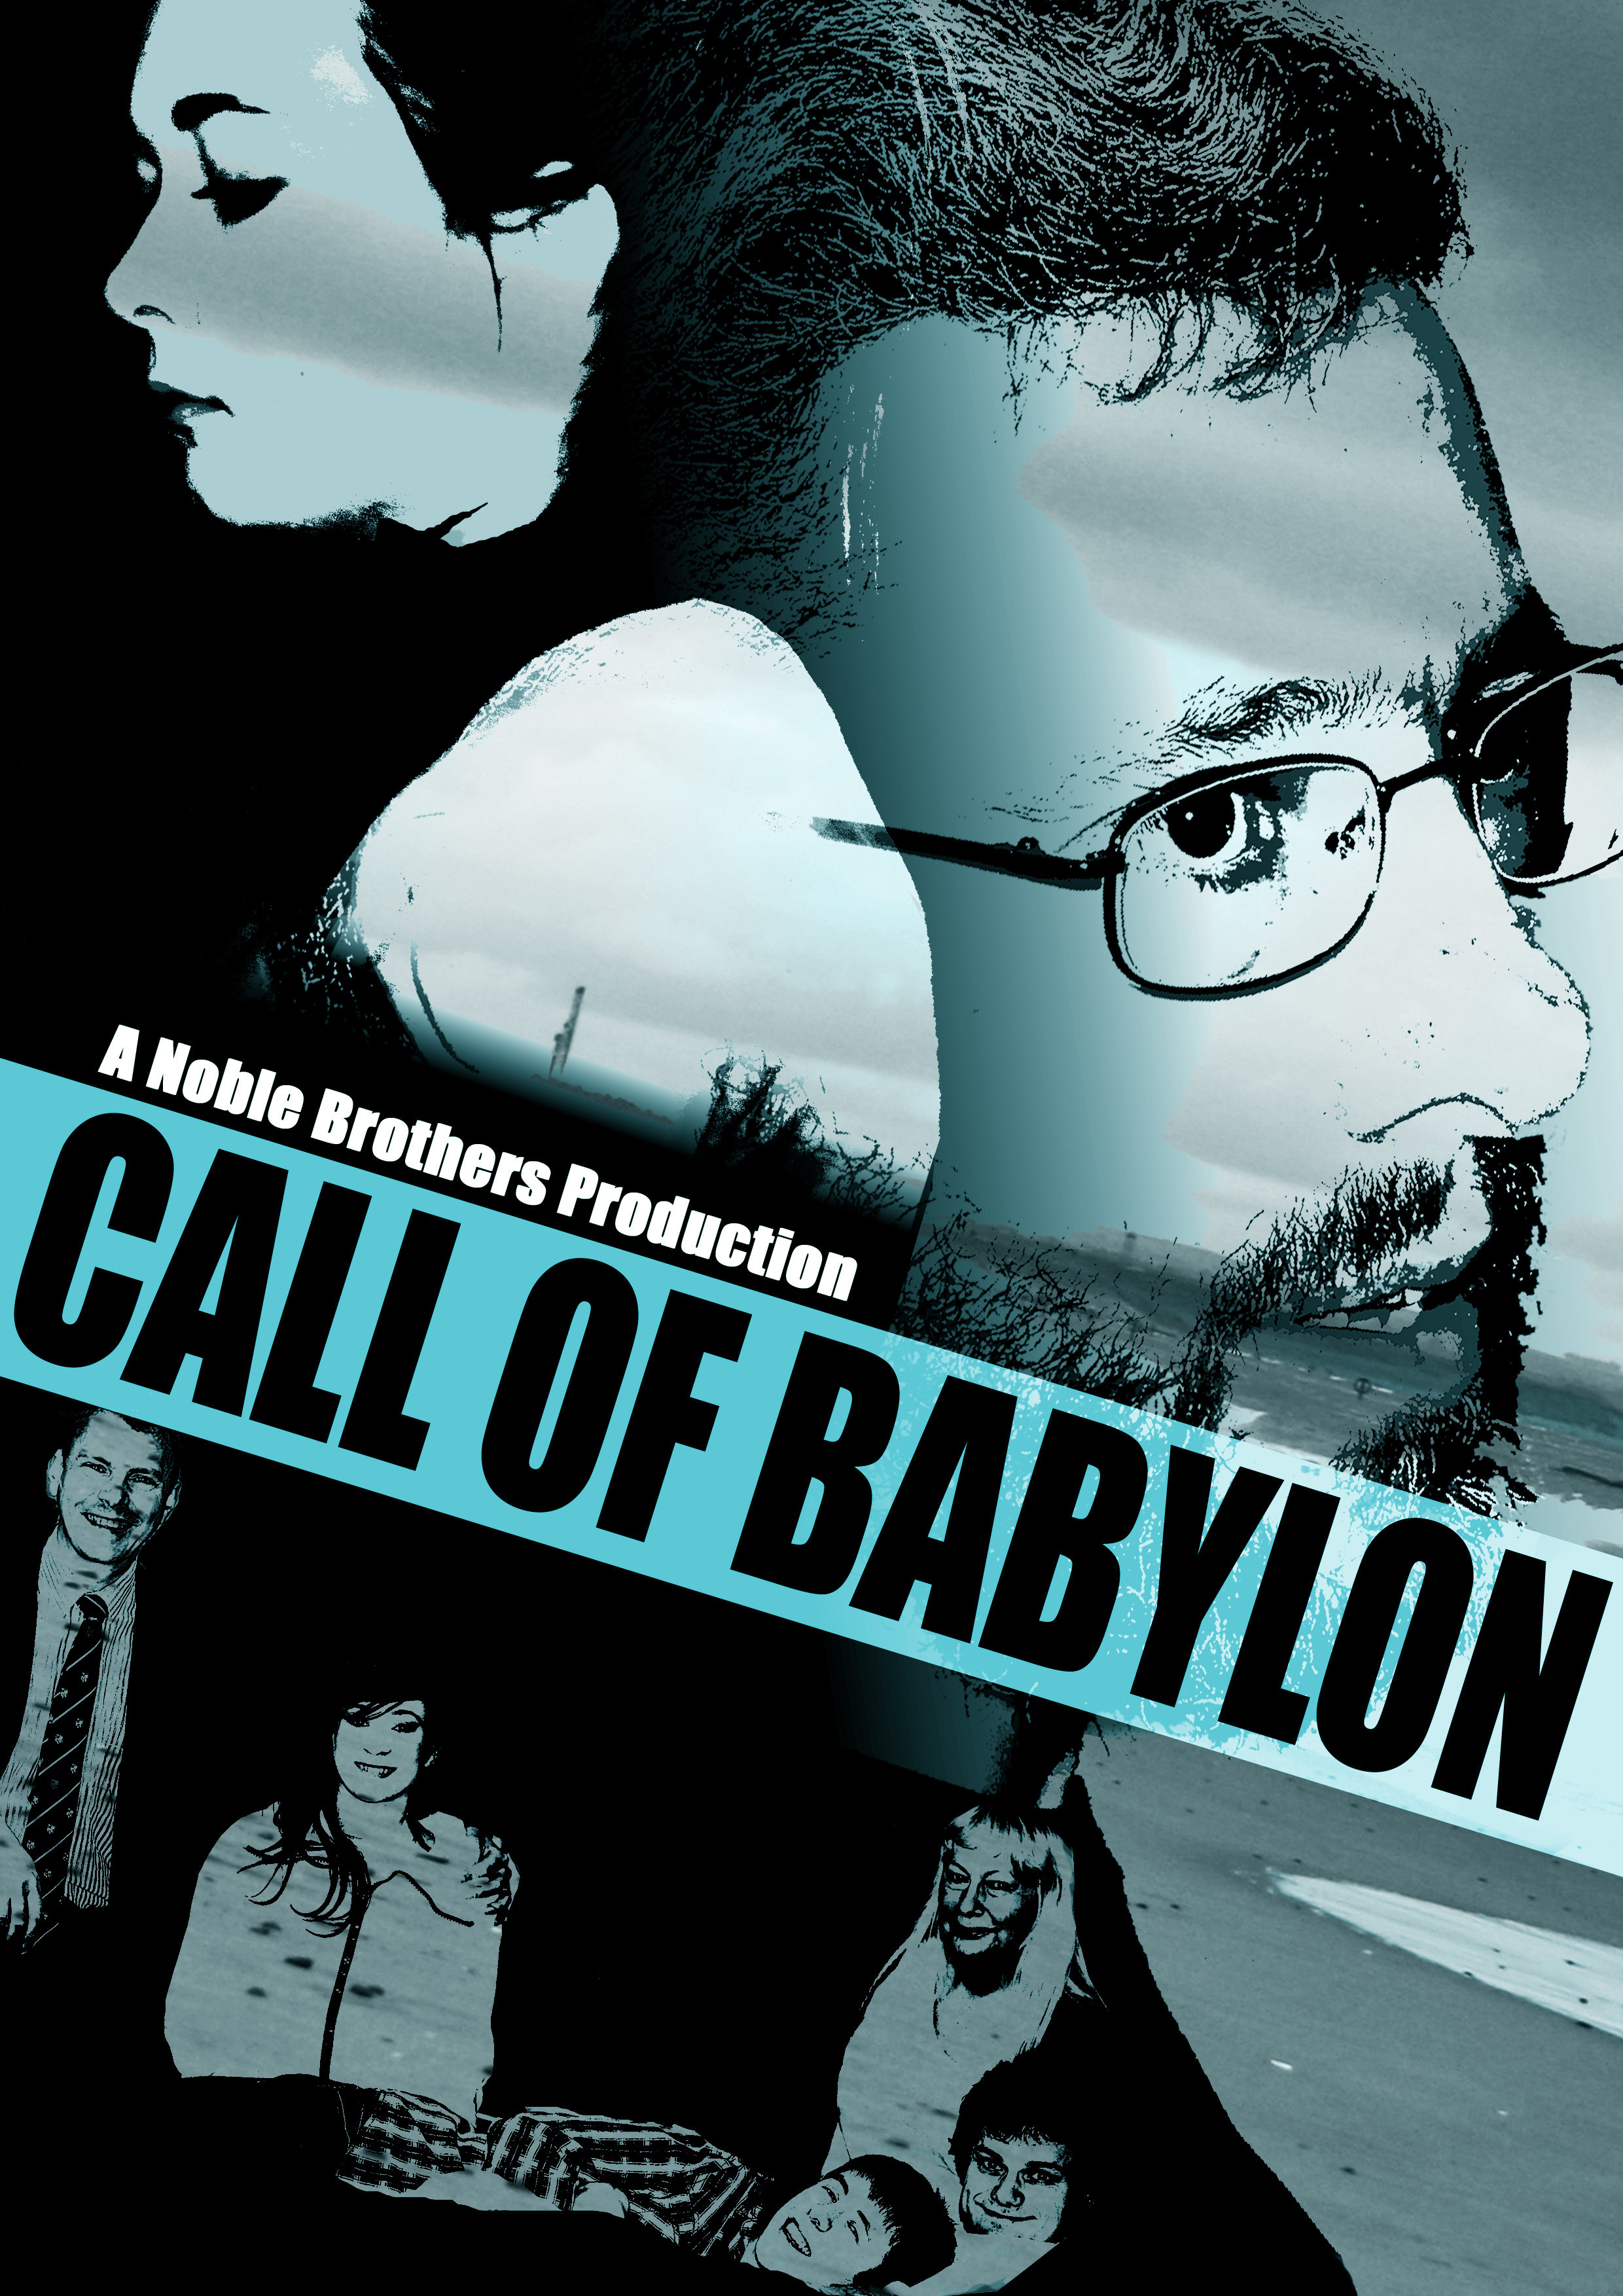 The official poster for CALL OF BABYLON (2012). Poster created by Sheng Guo Wu.